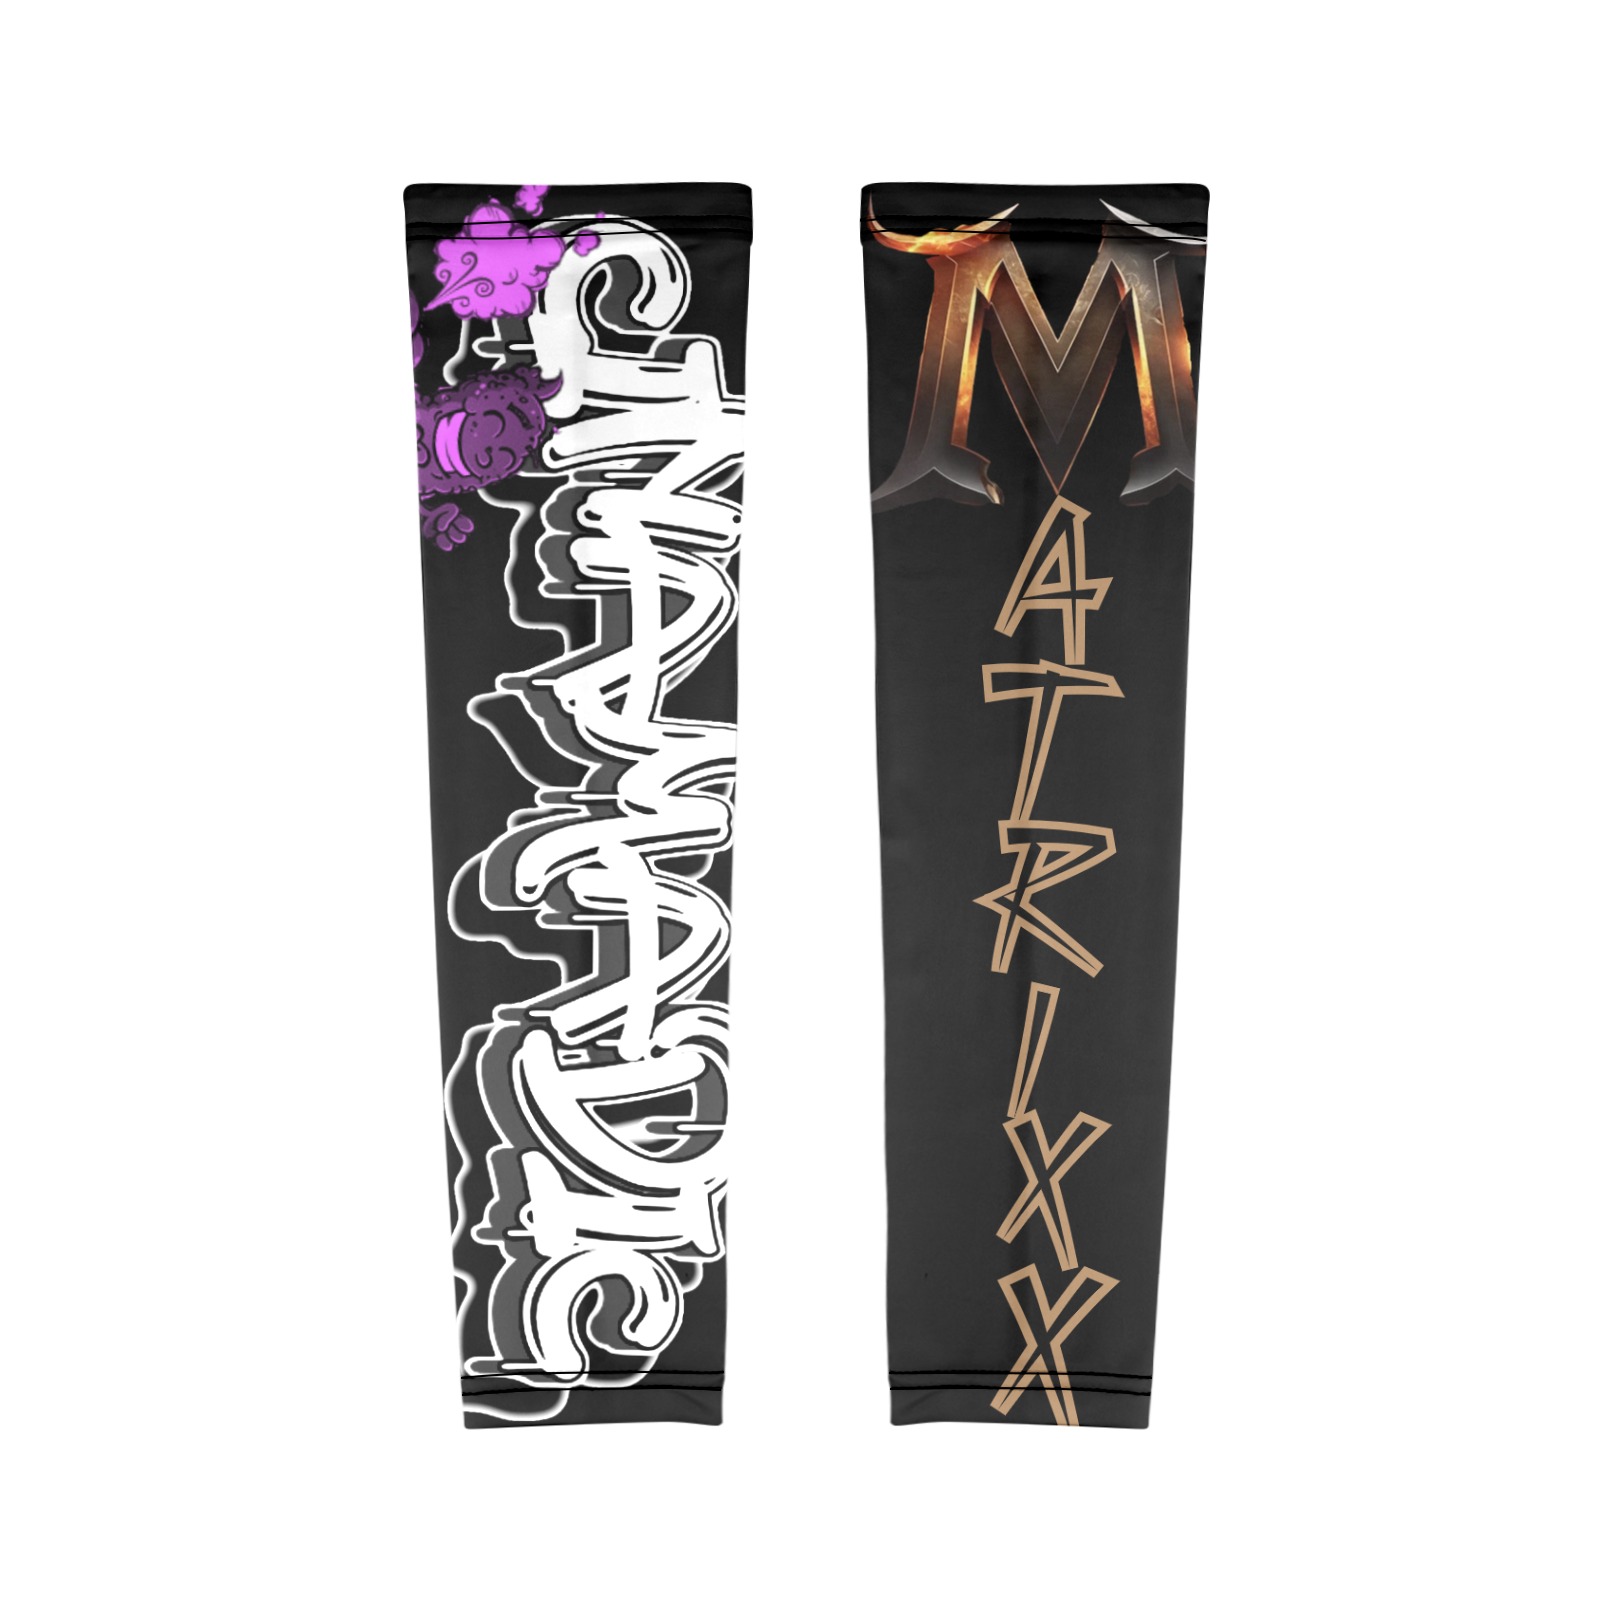 MaTrixx/CINAMADIC Arm Sleeves Arm Sleeves (Set of Two with Different Printings)